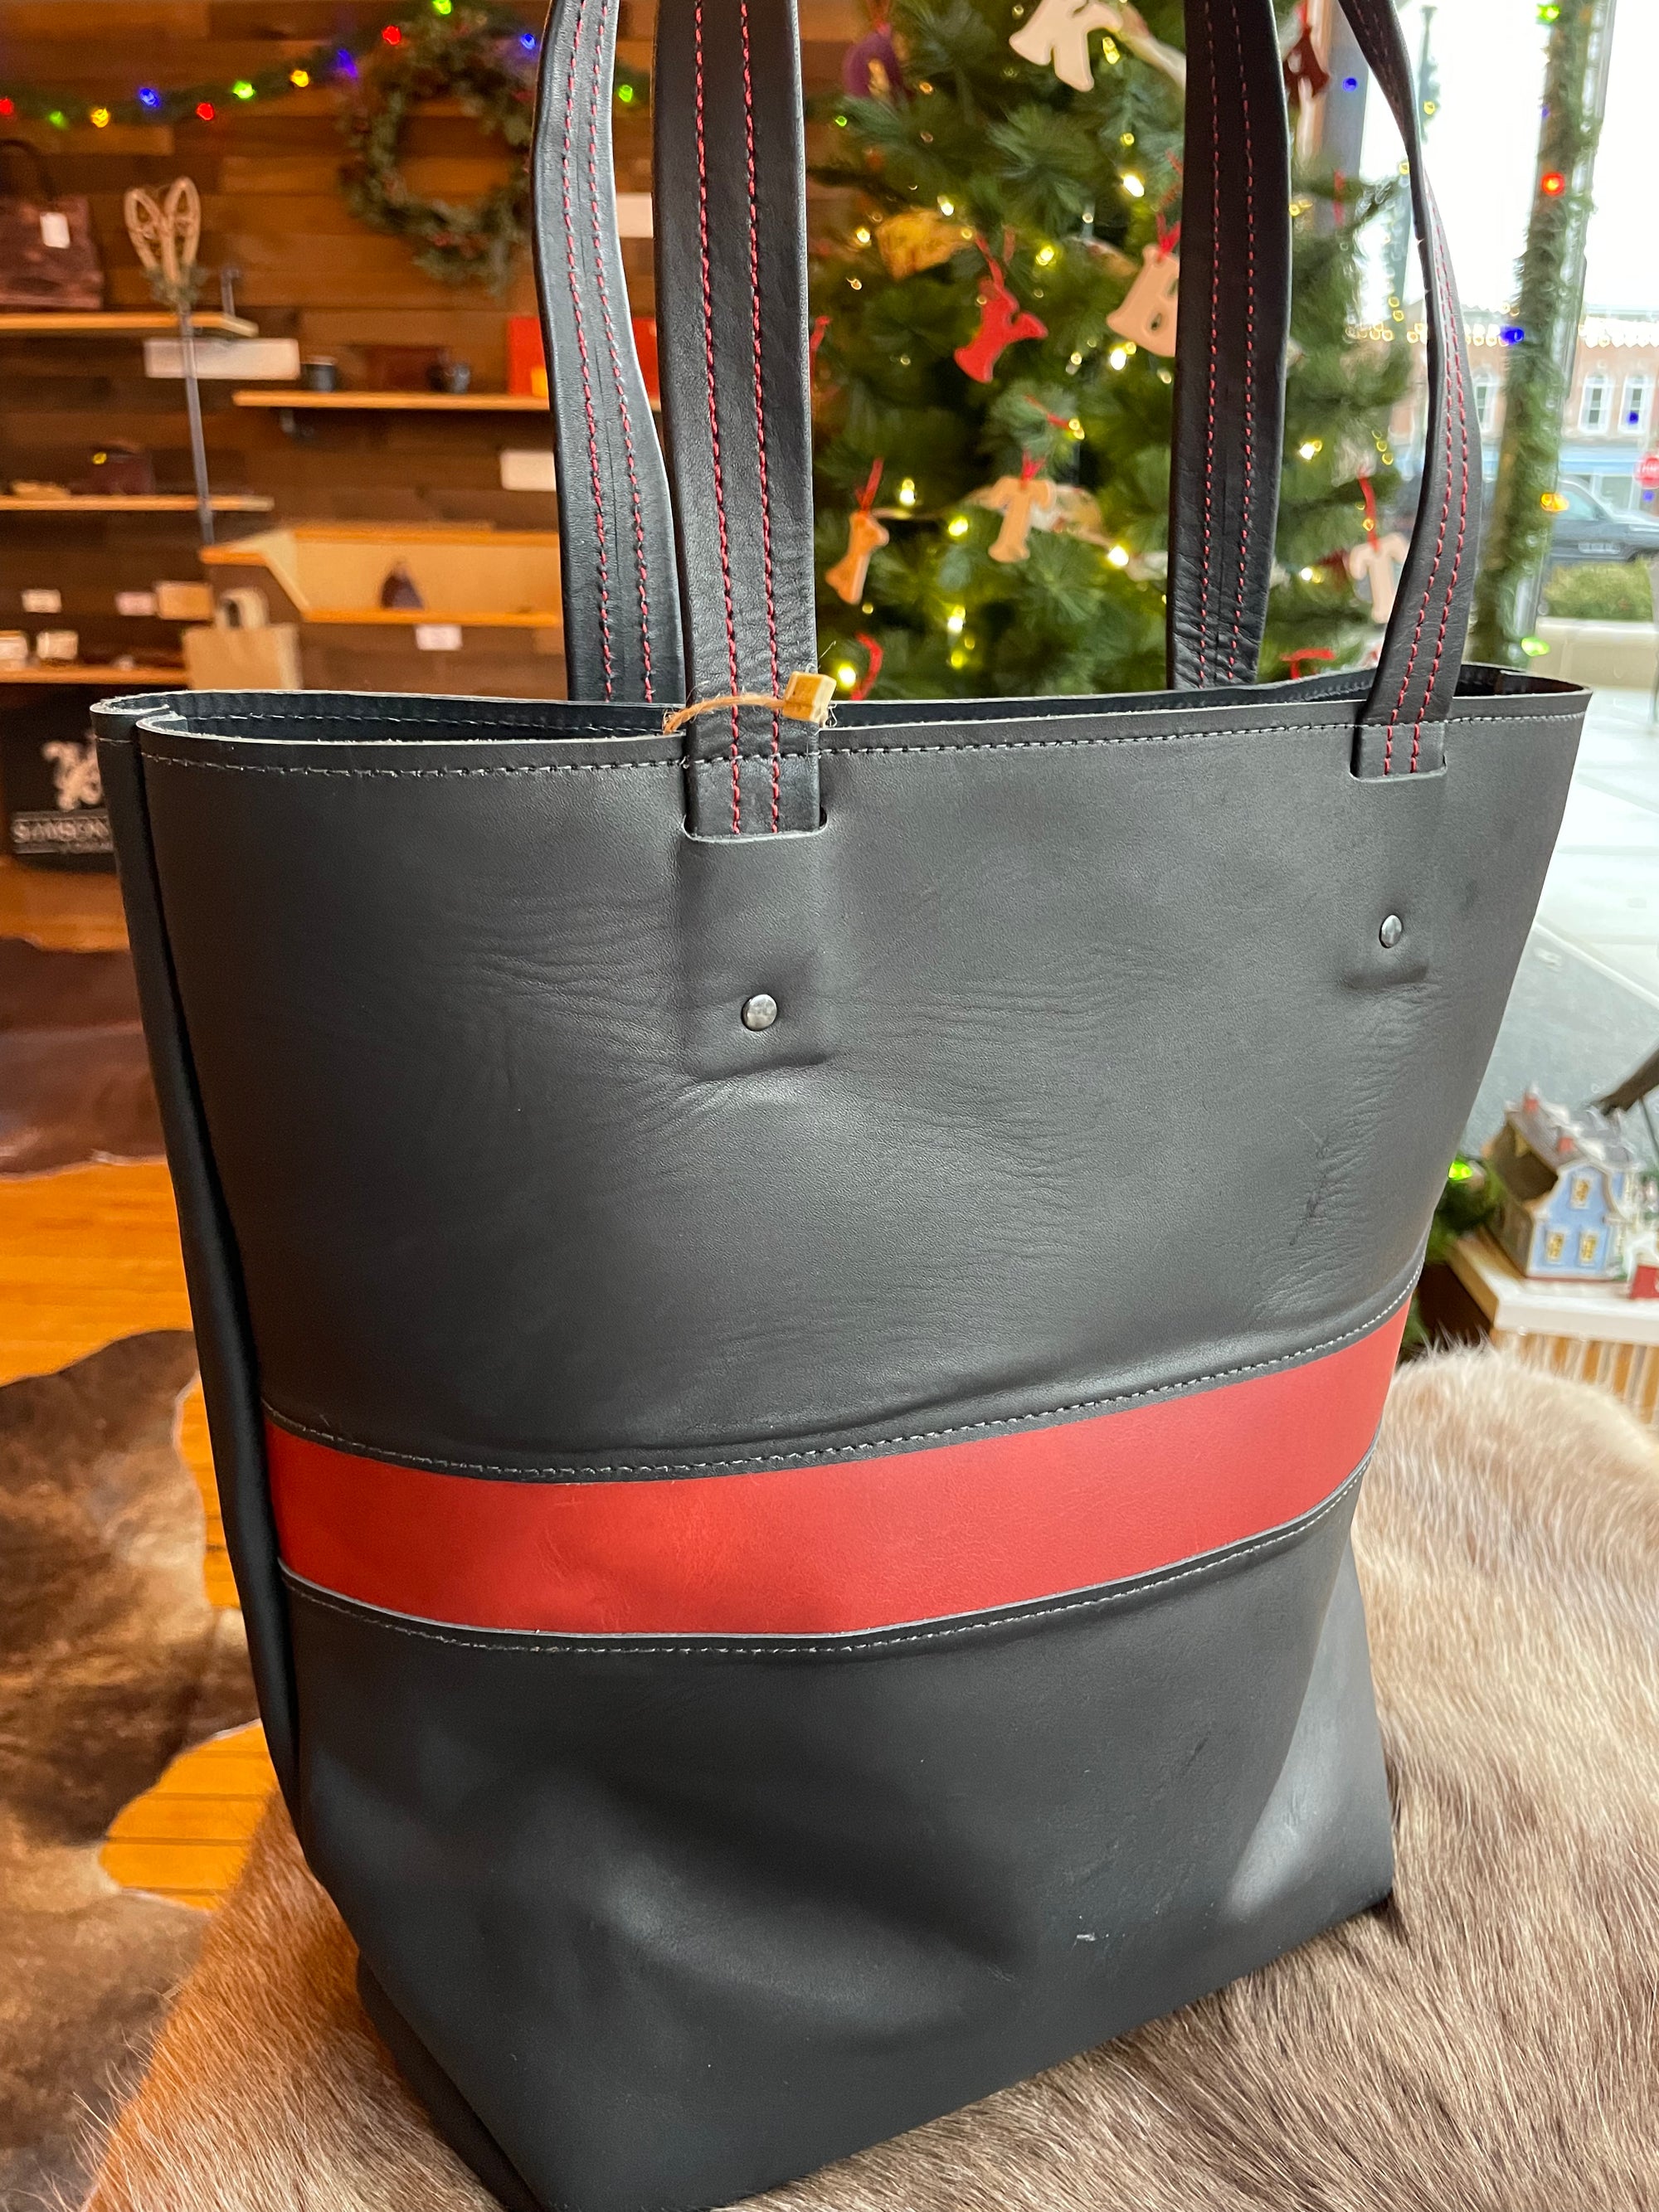 Fireman’s Specialty Tote